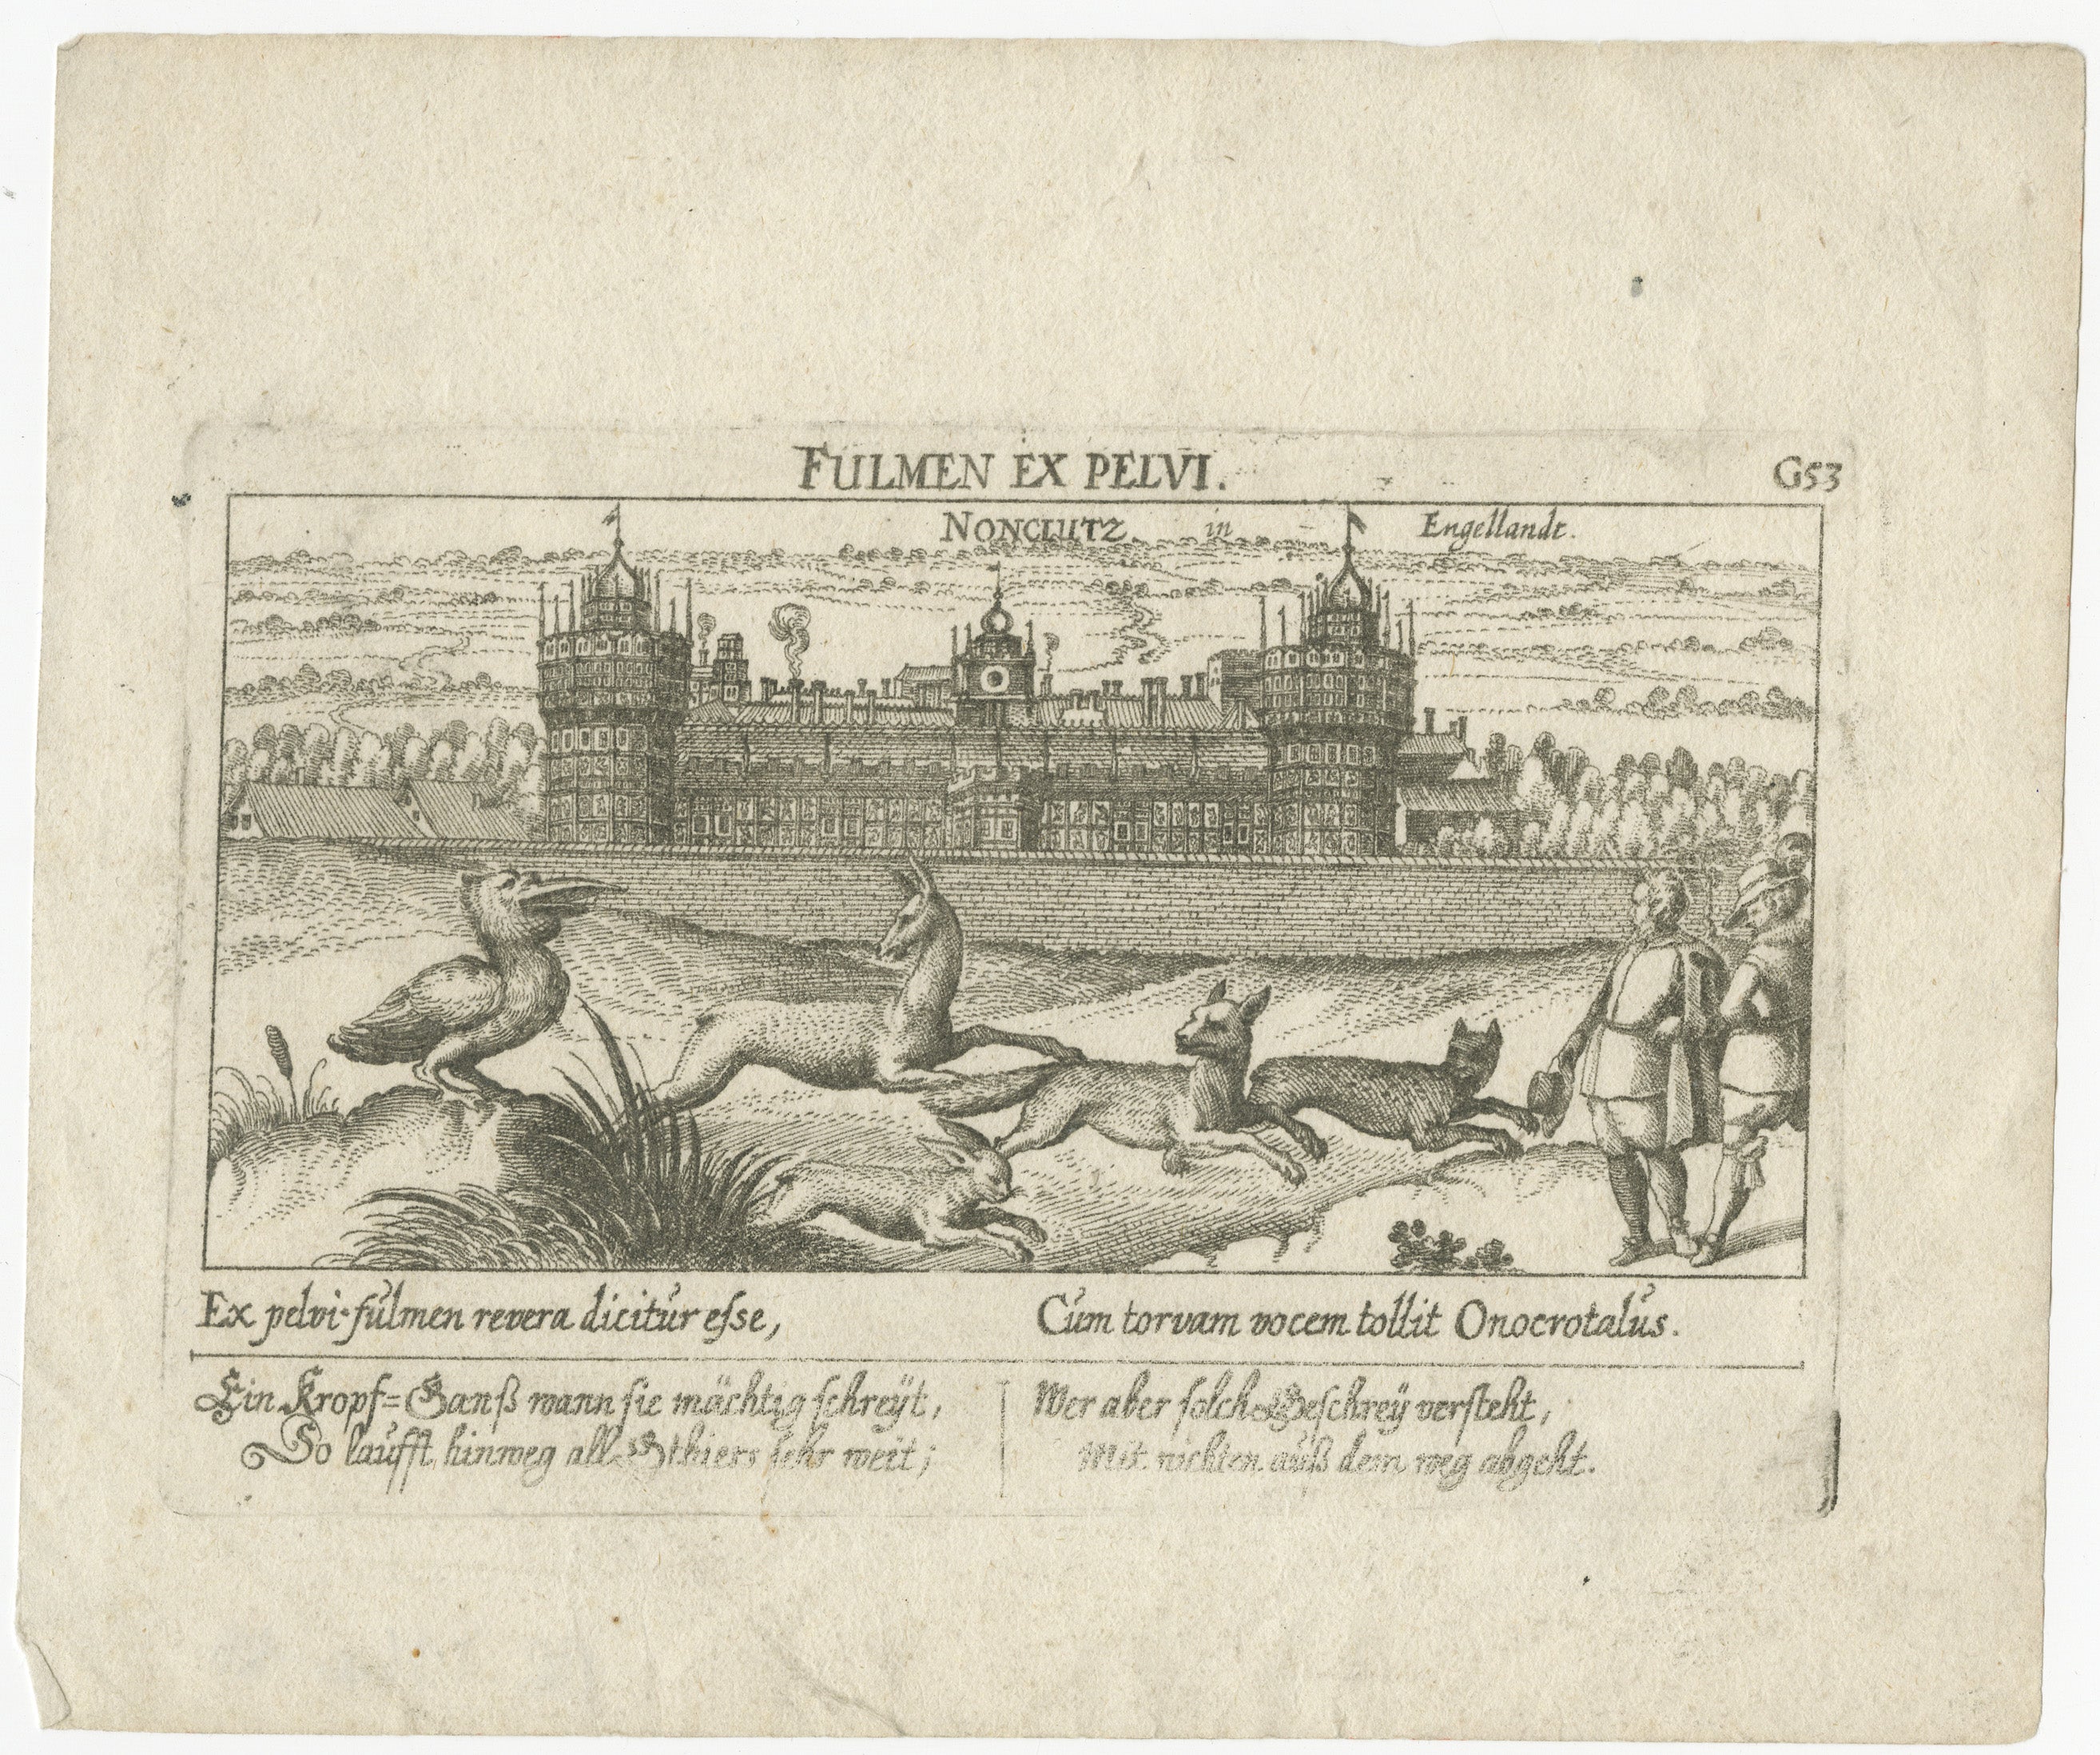 The image is an original engraving by Daniel Meisner from his work in Eberhard Kieser's 'Politisches Schatzkästlein' (Political Treasure Box), depicting the Nonsuch Palace in Surrey, England, which was commissioned by Henry VIII. This engraving is